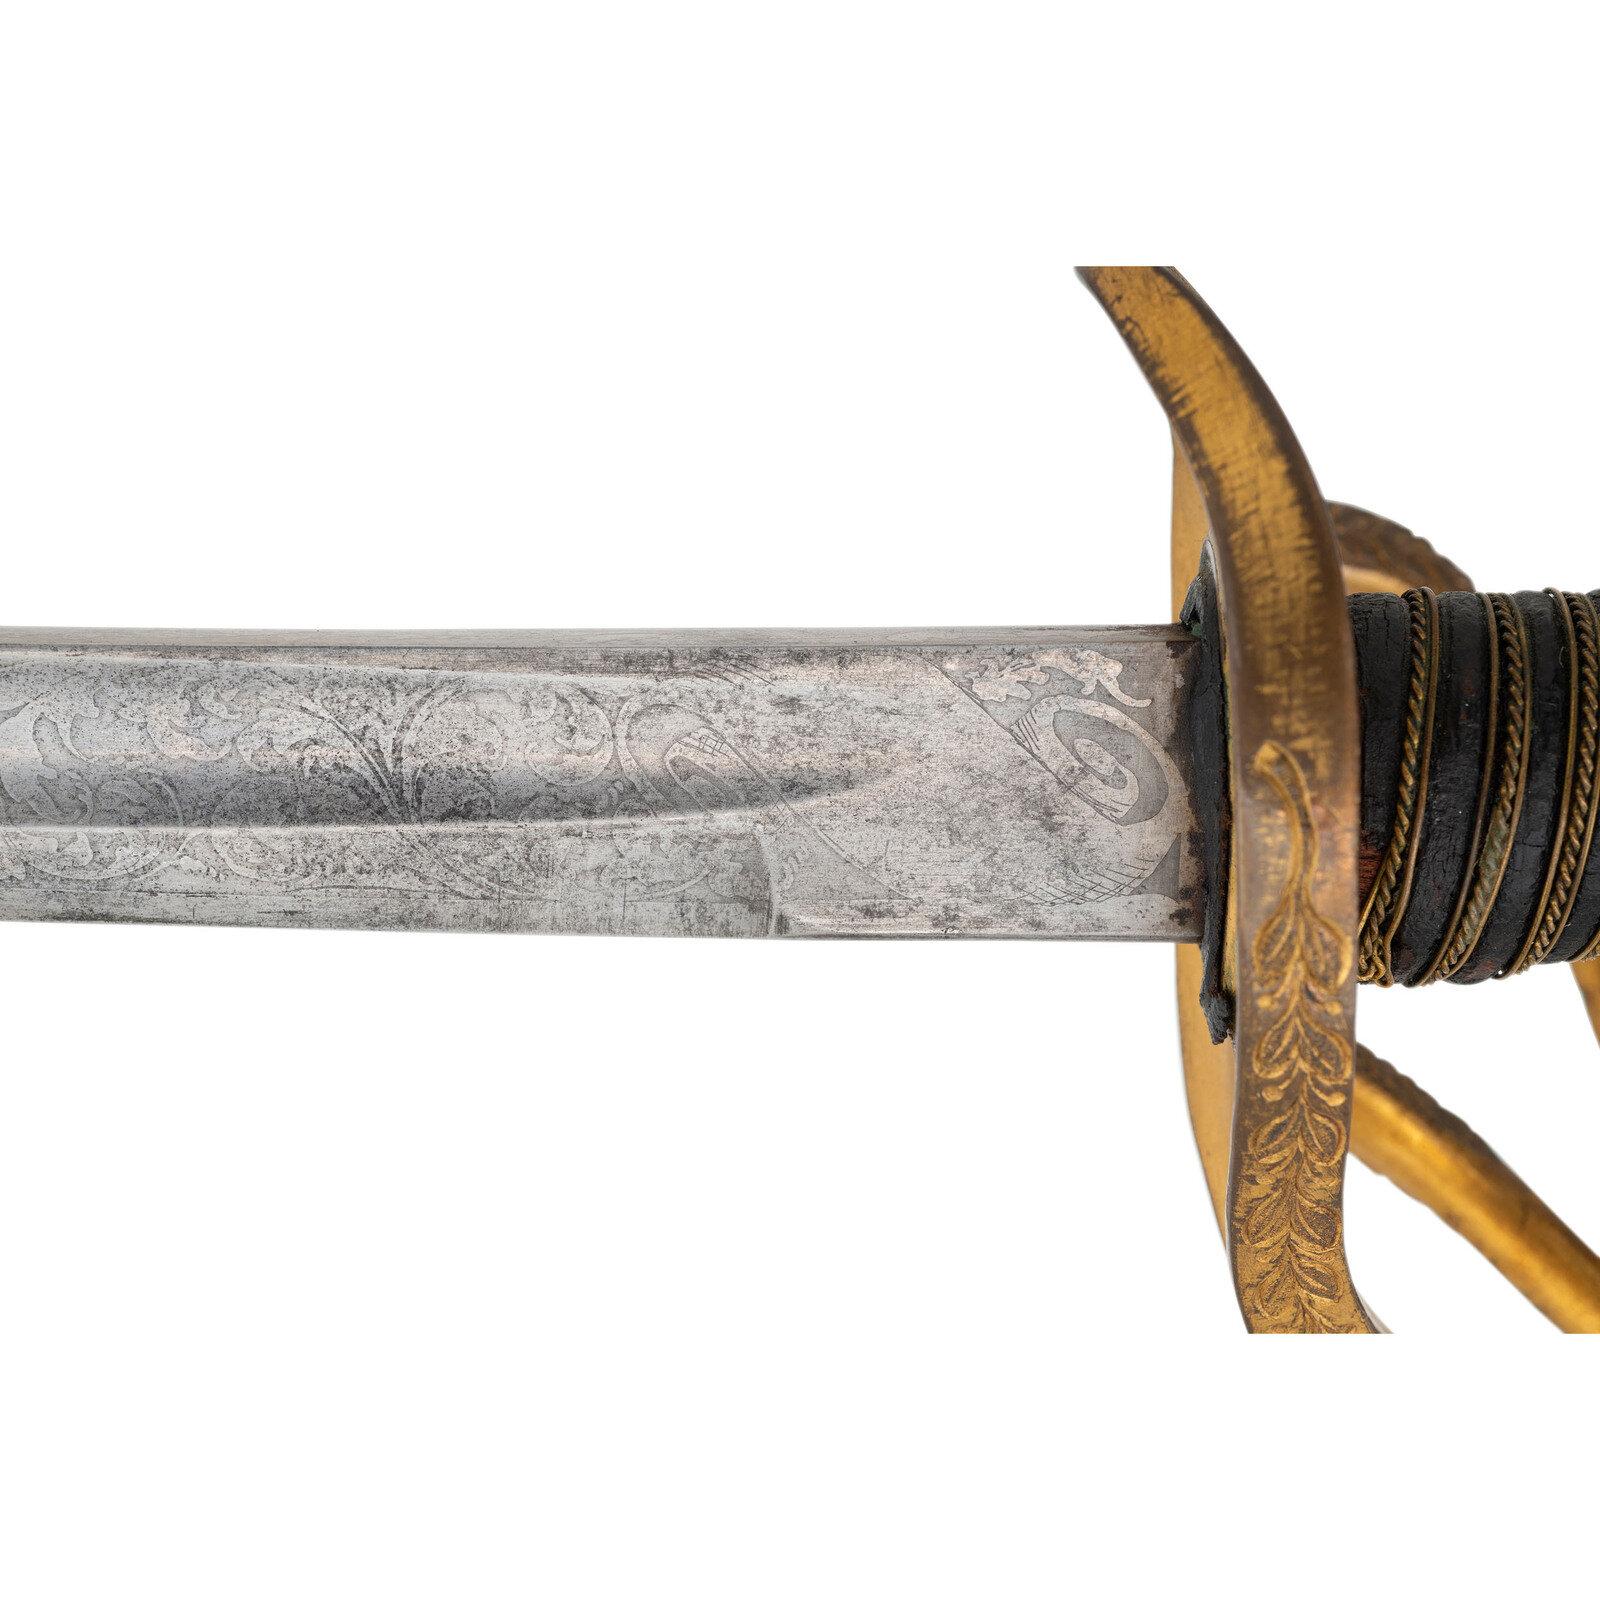 Sauerbier Cavalry Officers' Saber with Etched Blade of Lt Sullivan - KIA at Tomkinsville, KY